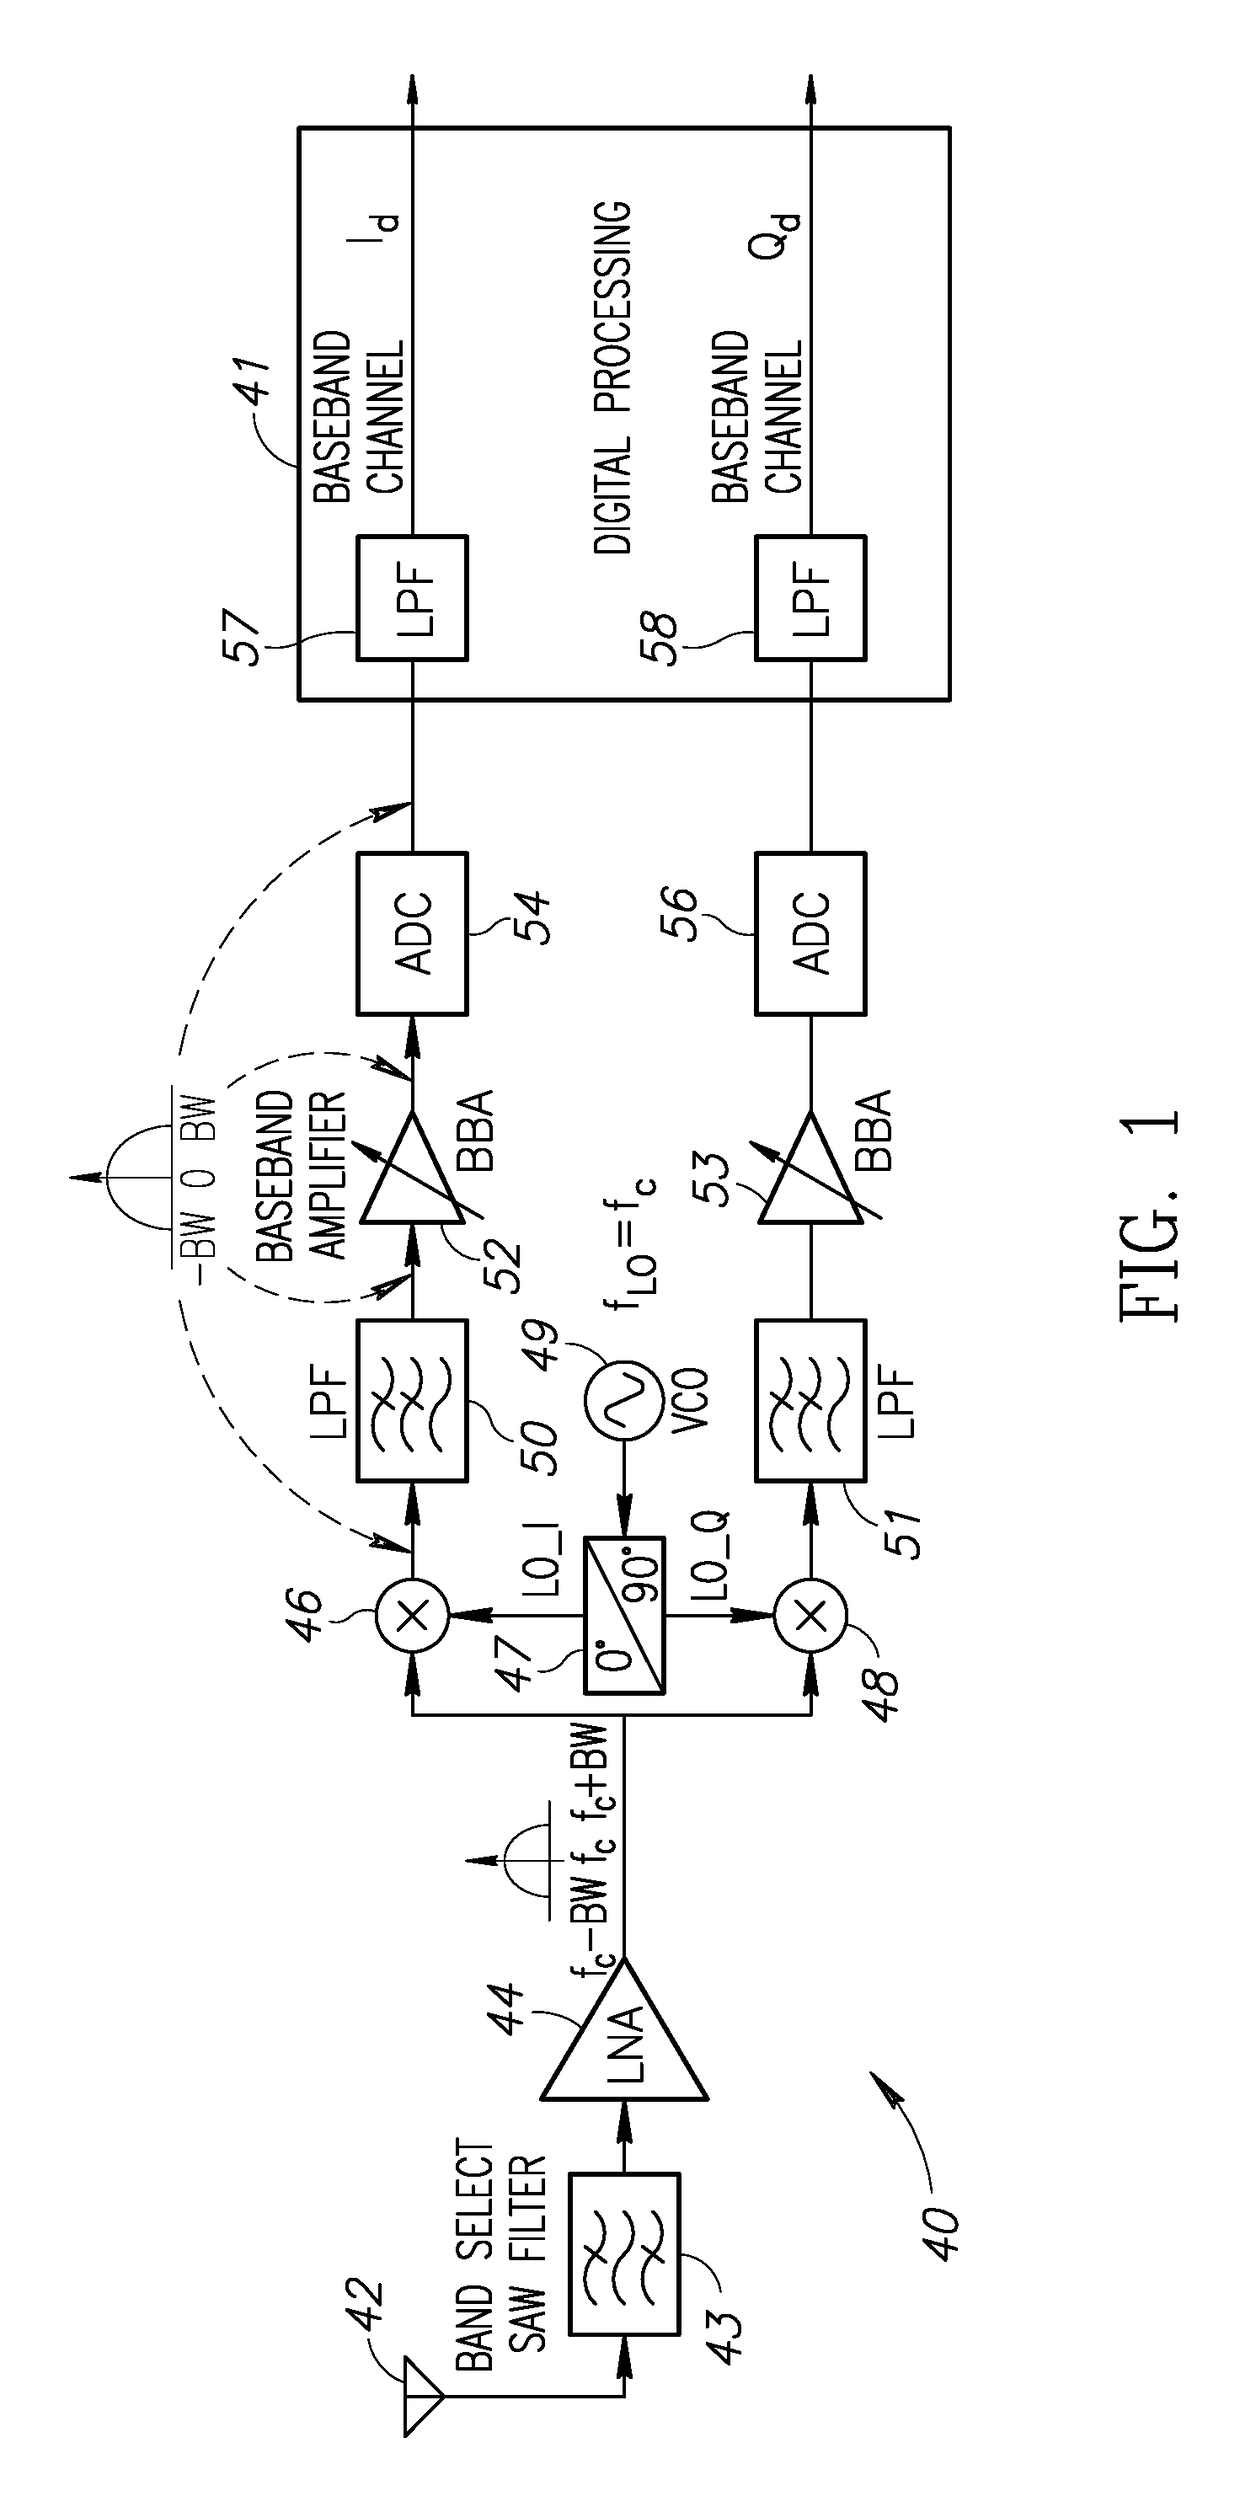 Apparatus and method of detection of image interference in a radio frequency receiver